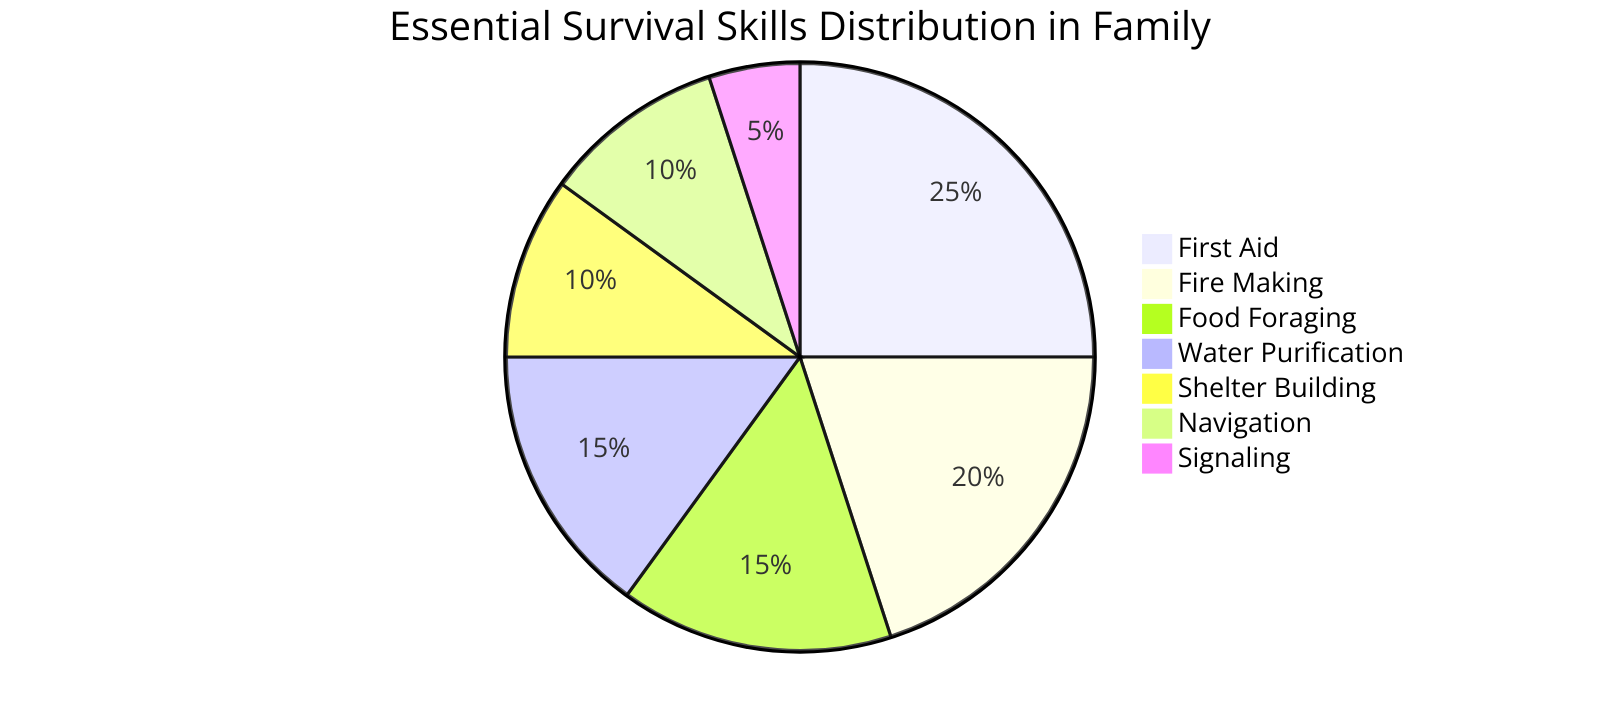 the distribution of essential survival skills across the family